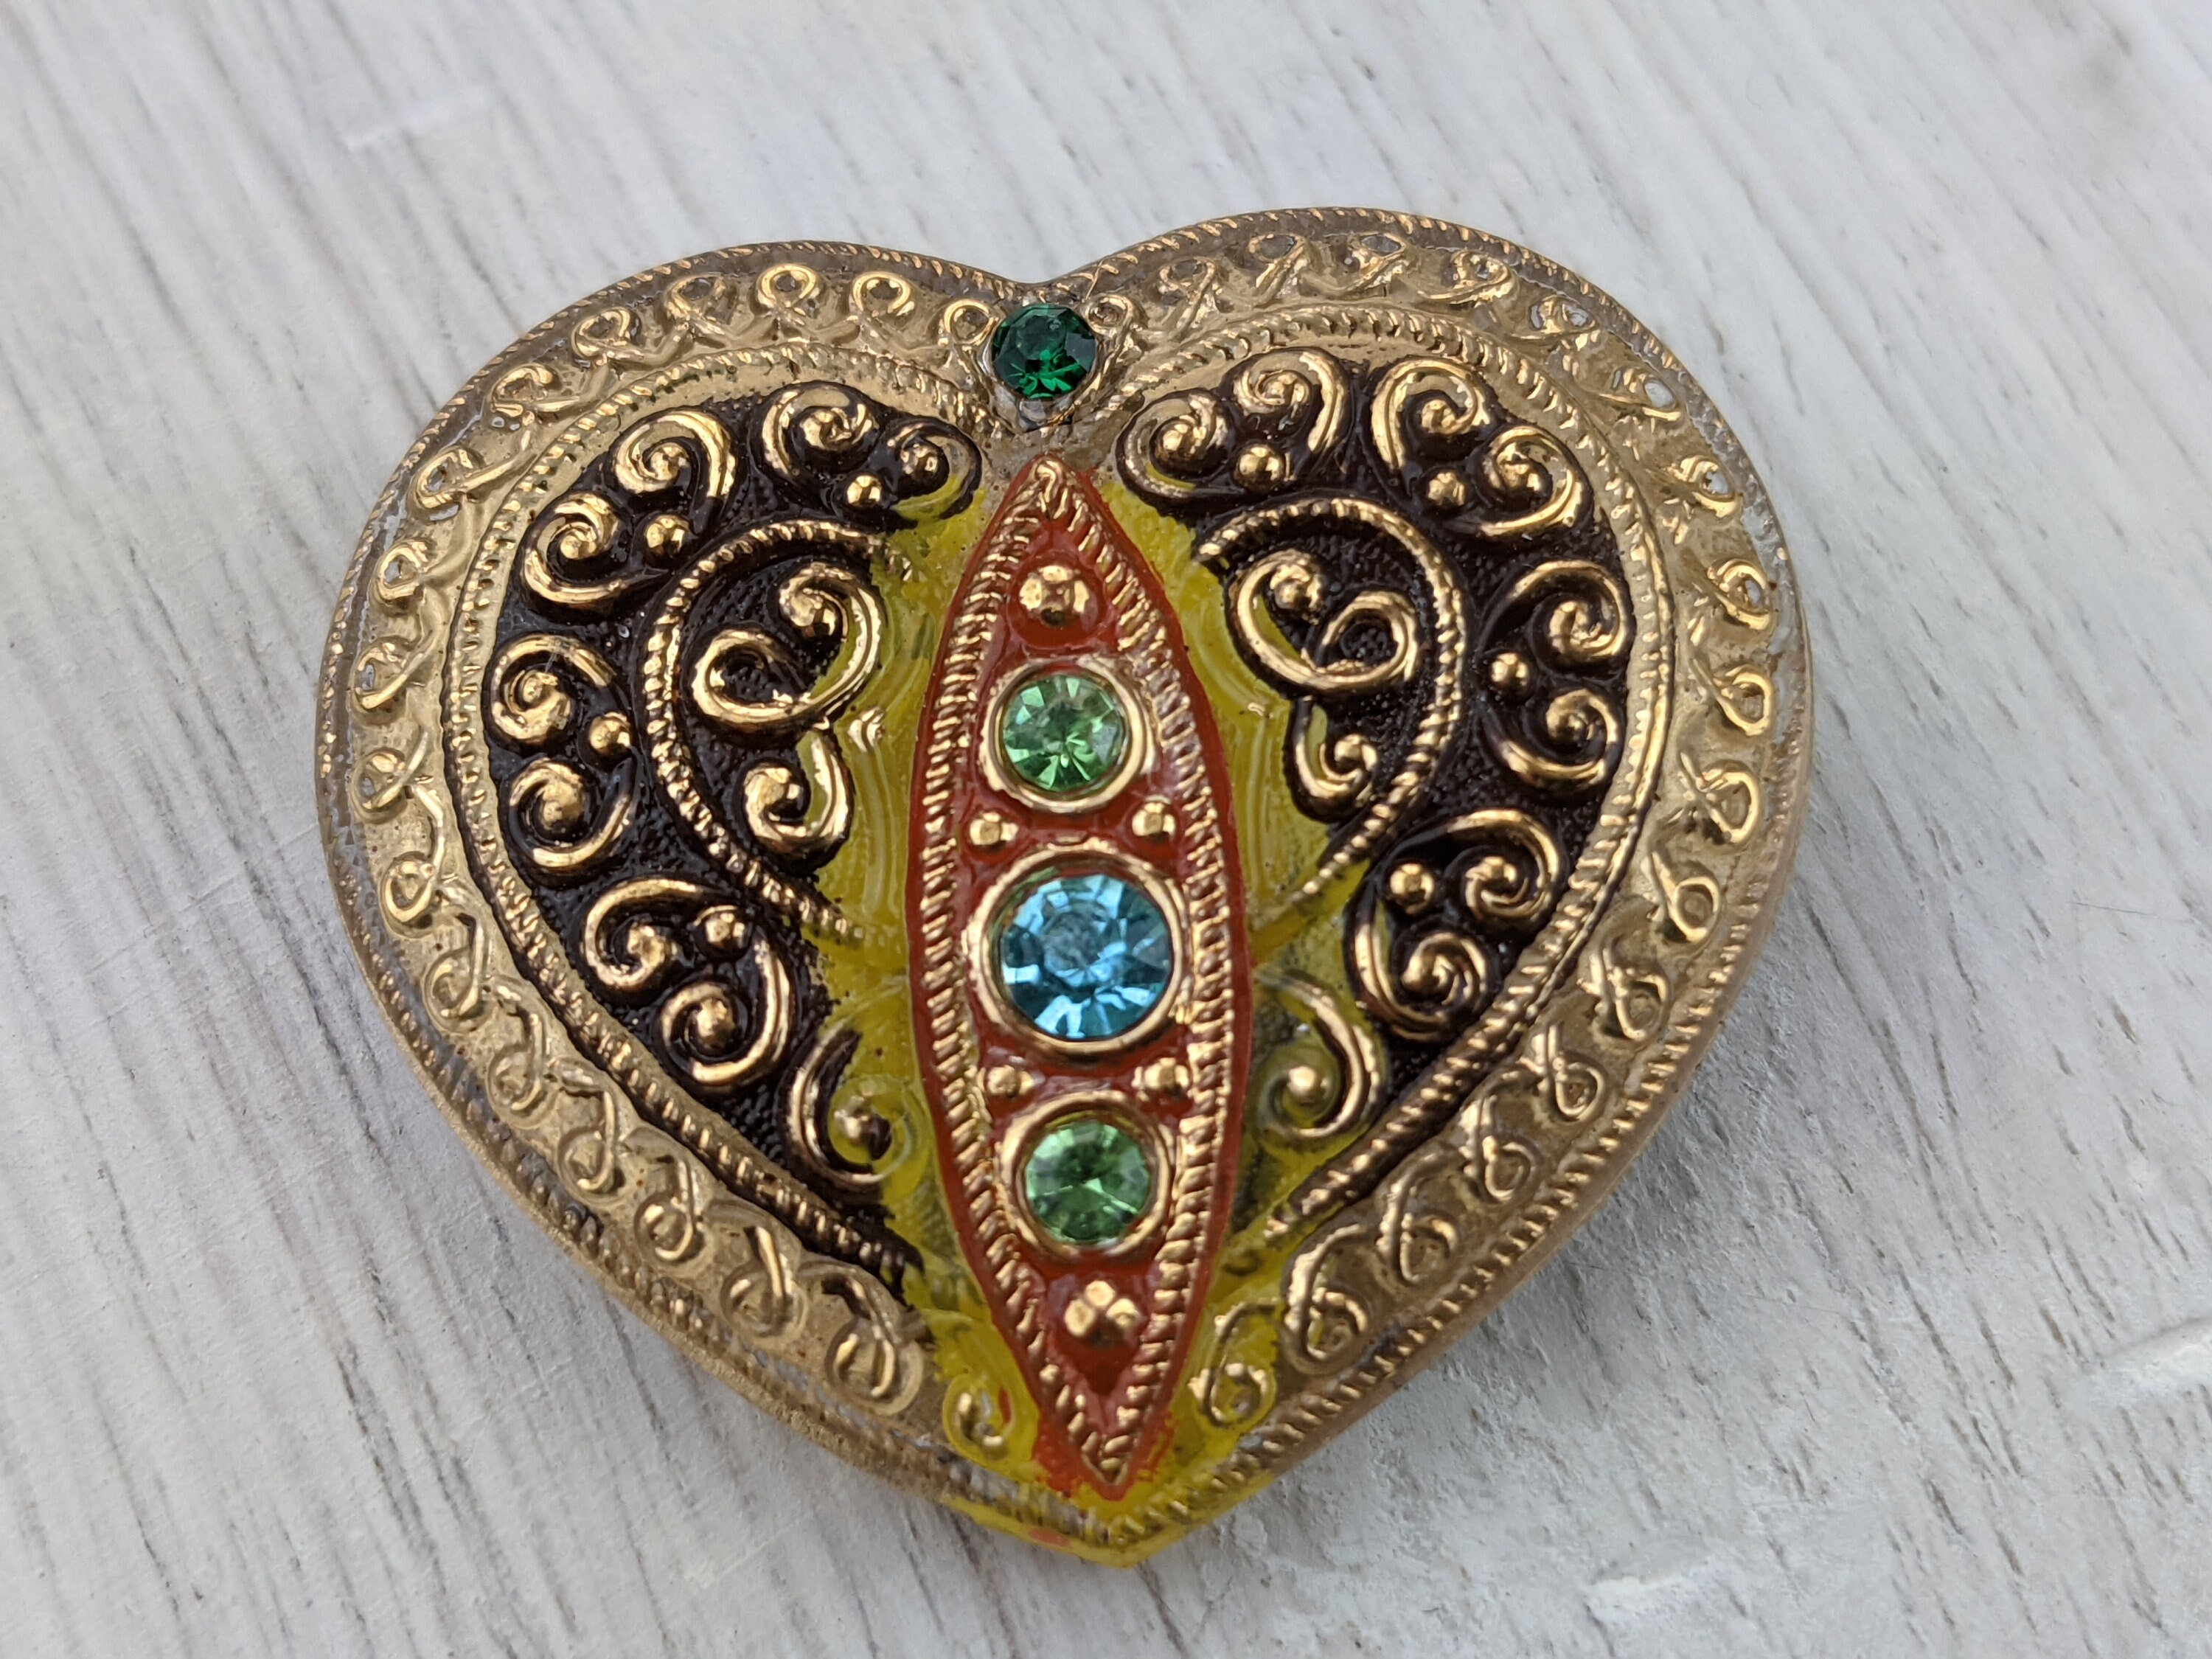 Wonderful value at 3.79 32 mm Czech glass heart buttons with Preciosa crystals 